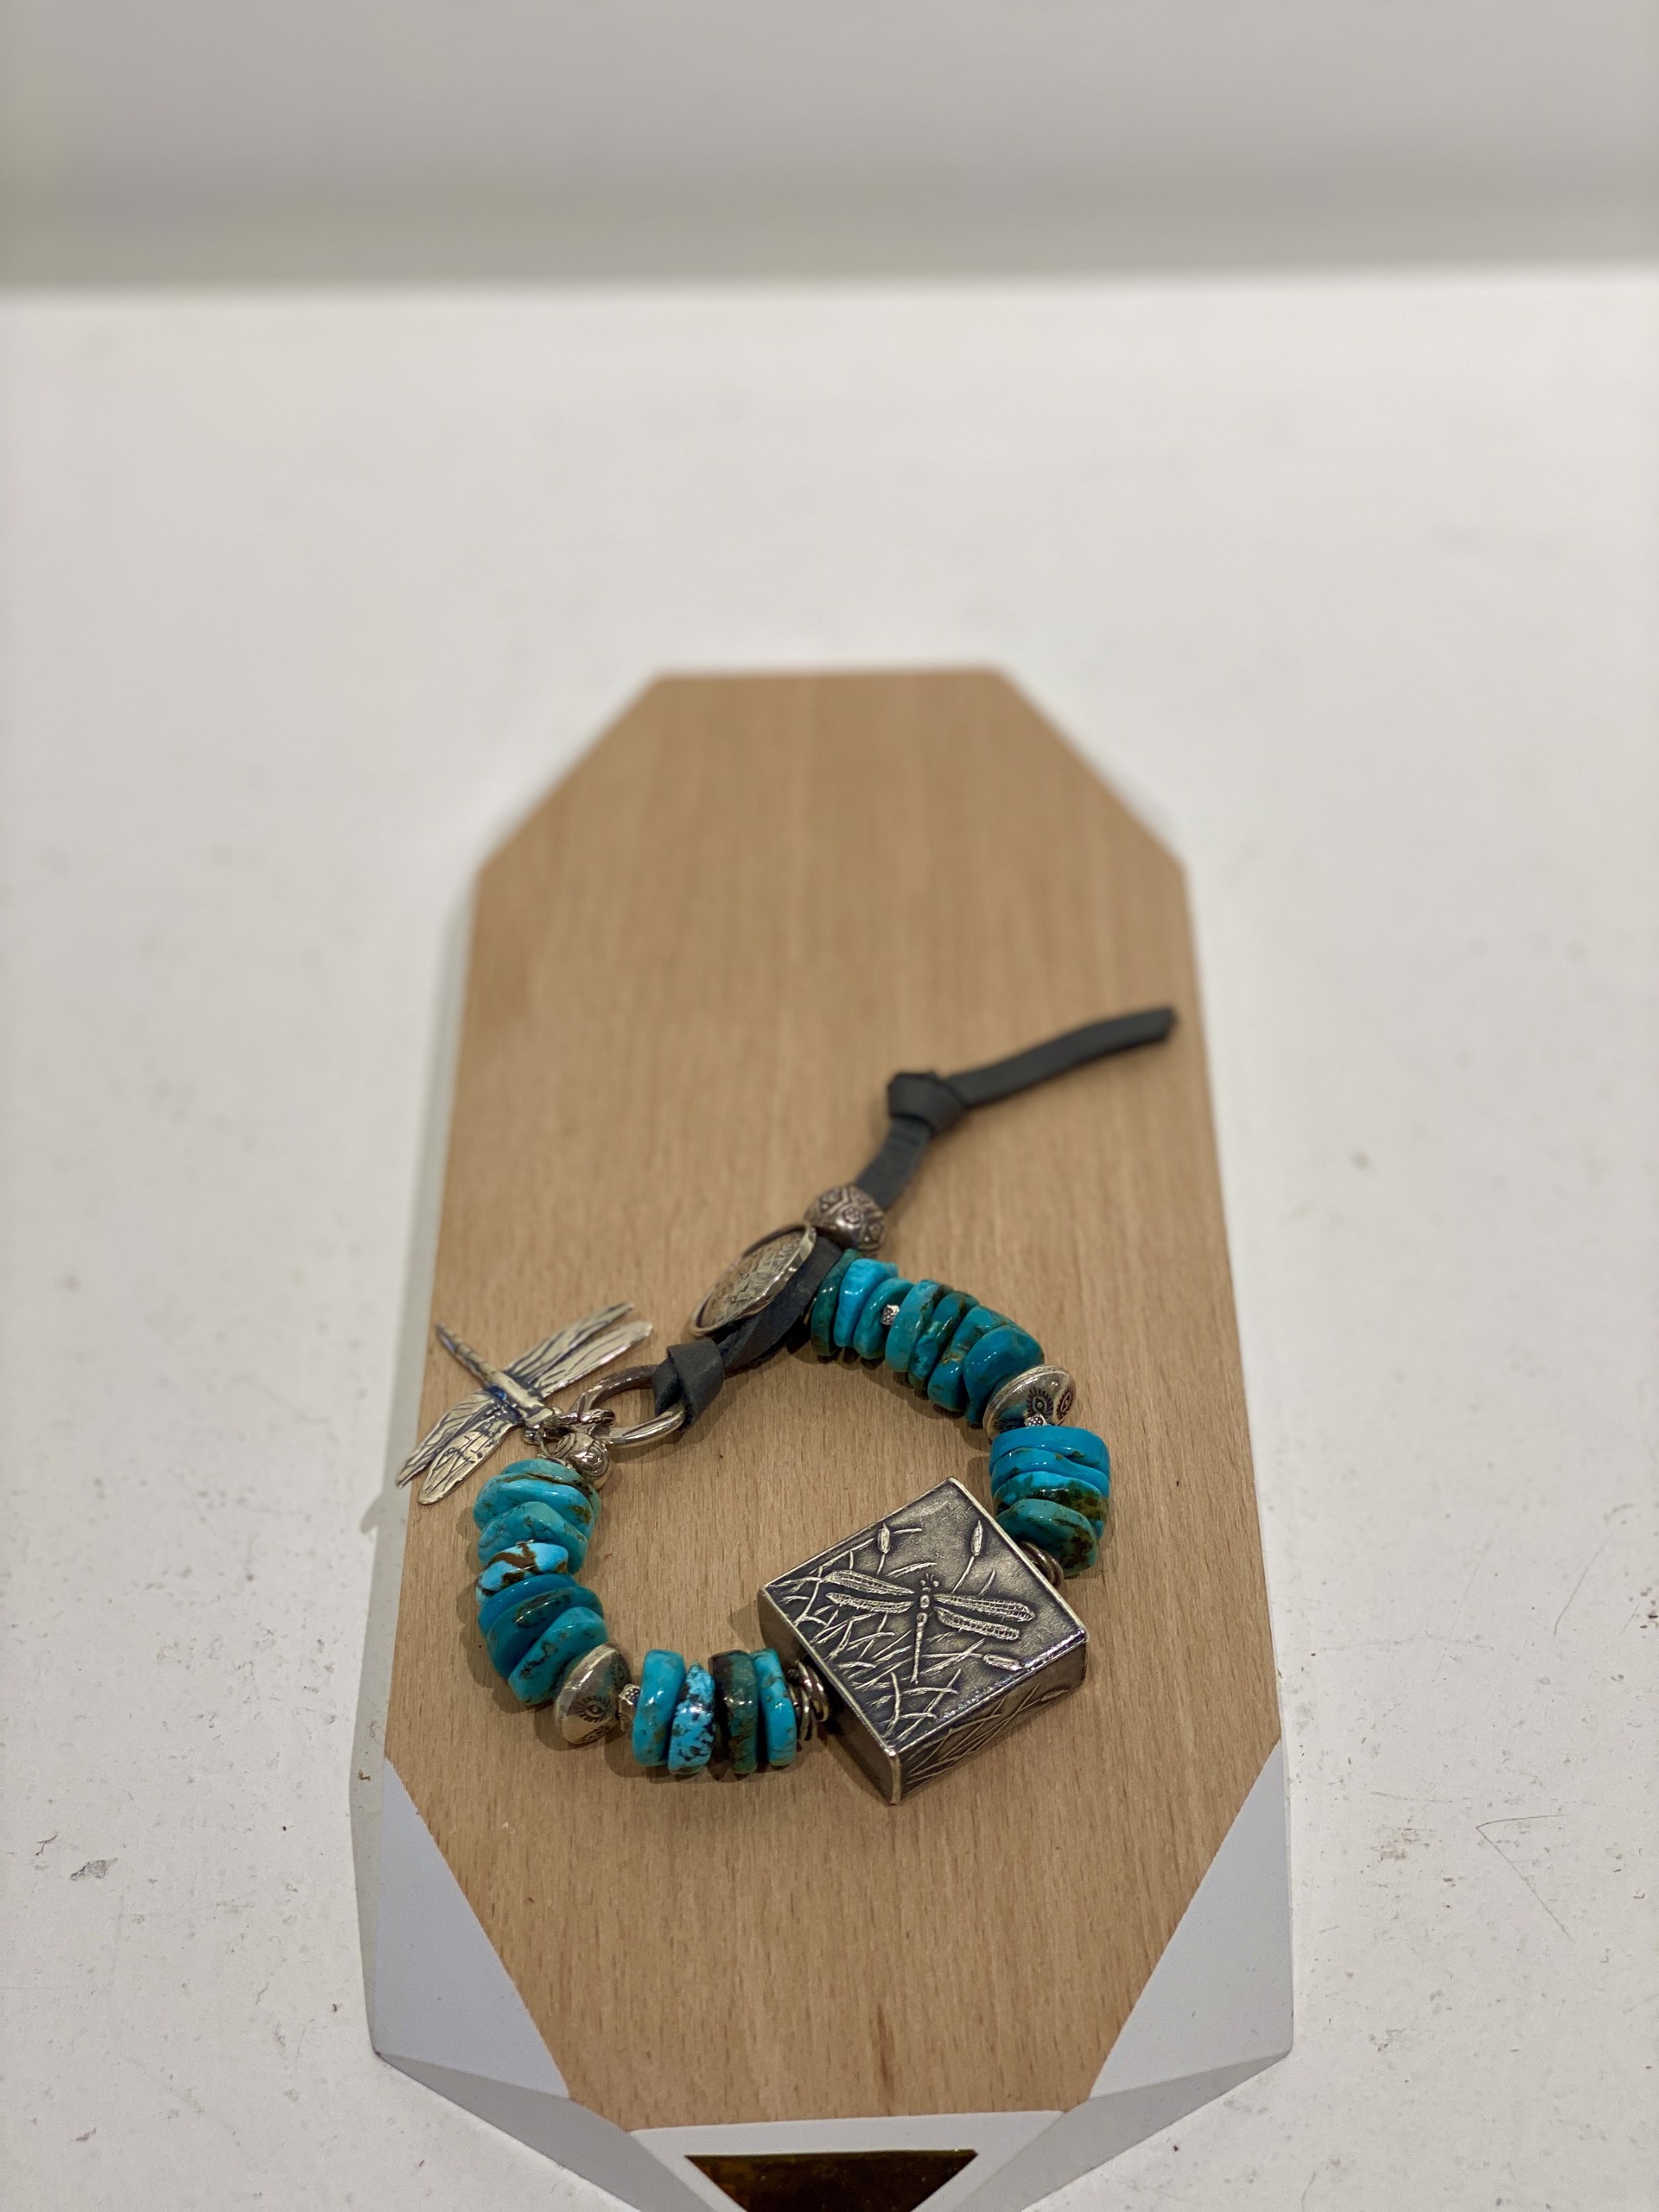 Ann Choi Dragonfly and Kingman Turquoise bracelet #12 by Melissa Turney